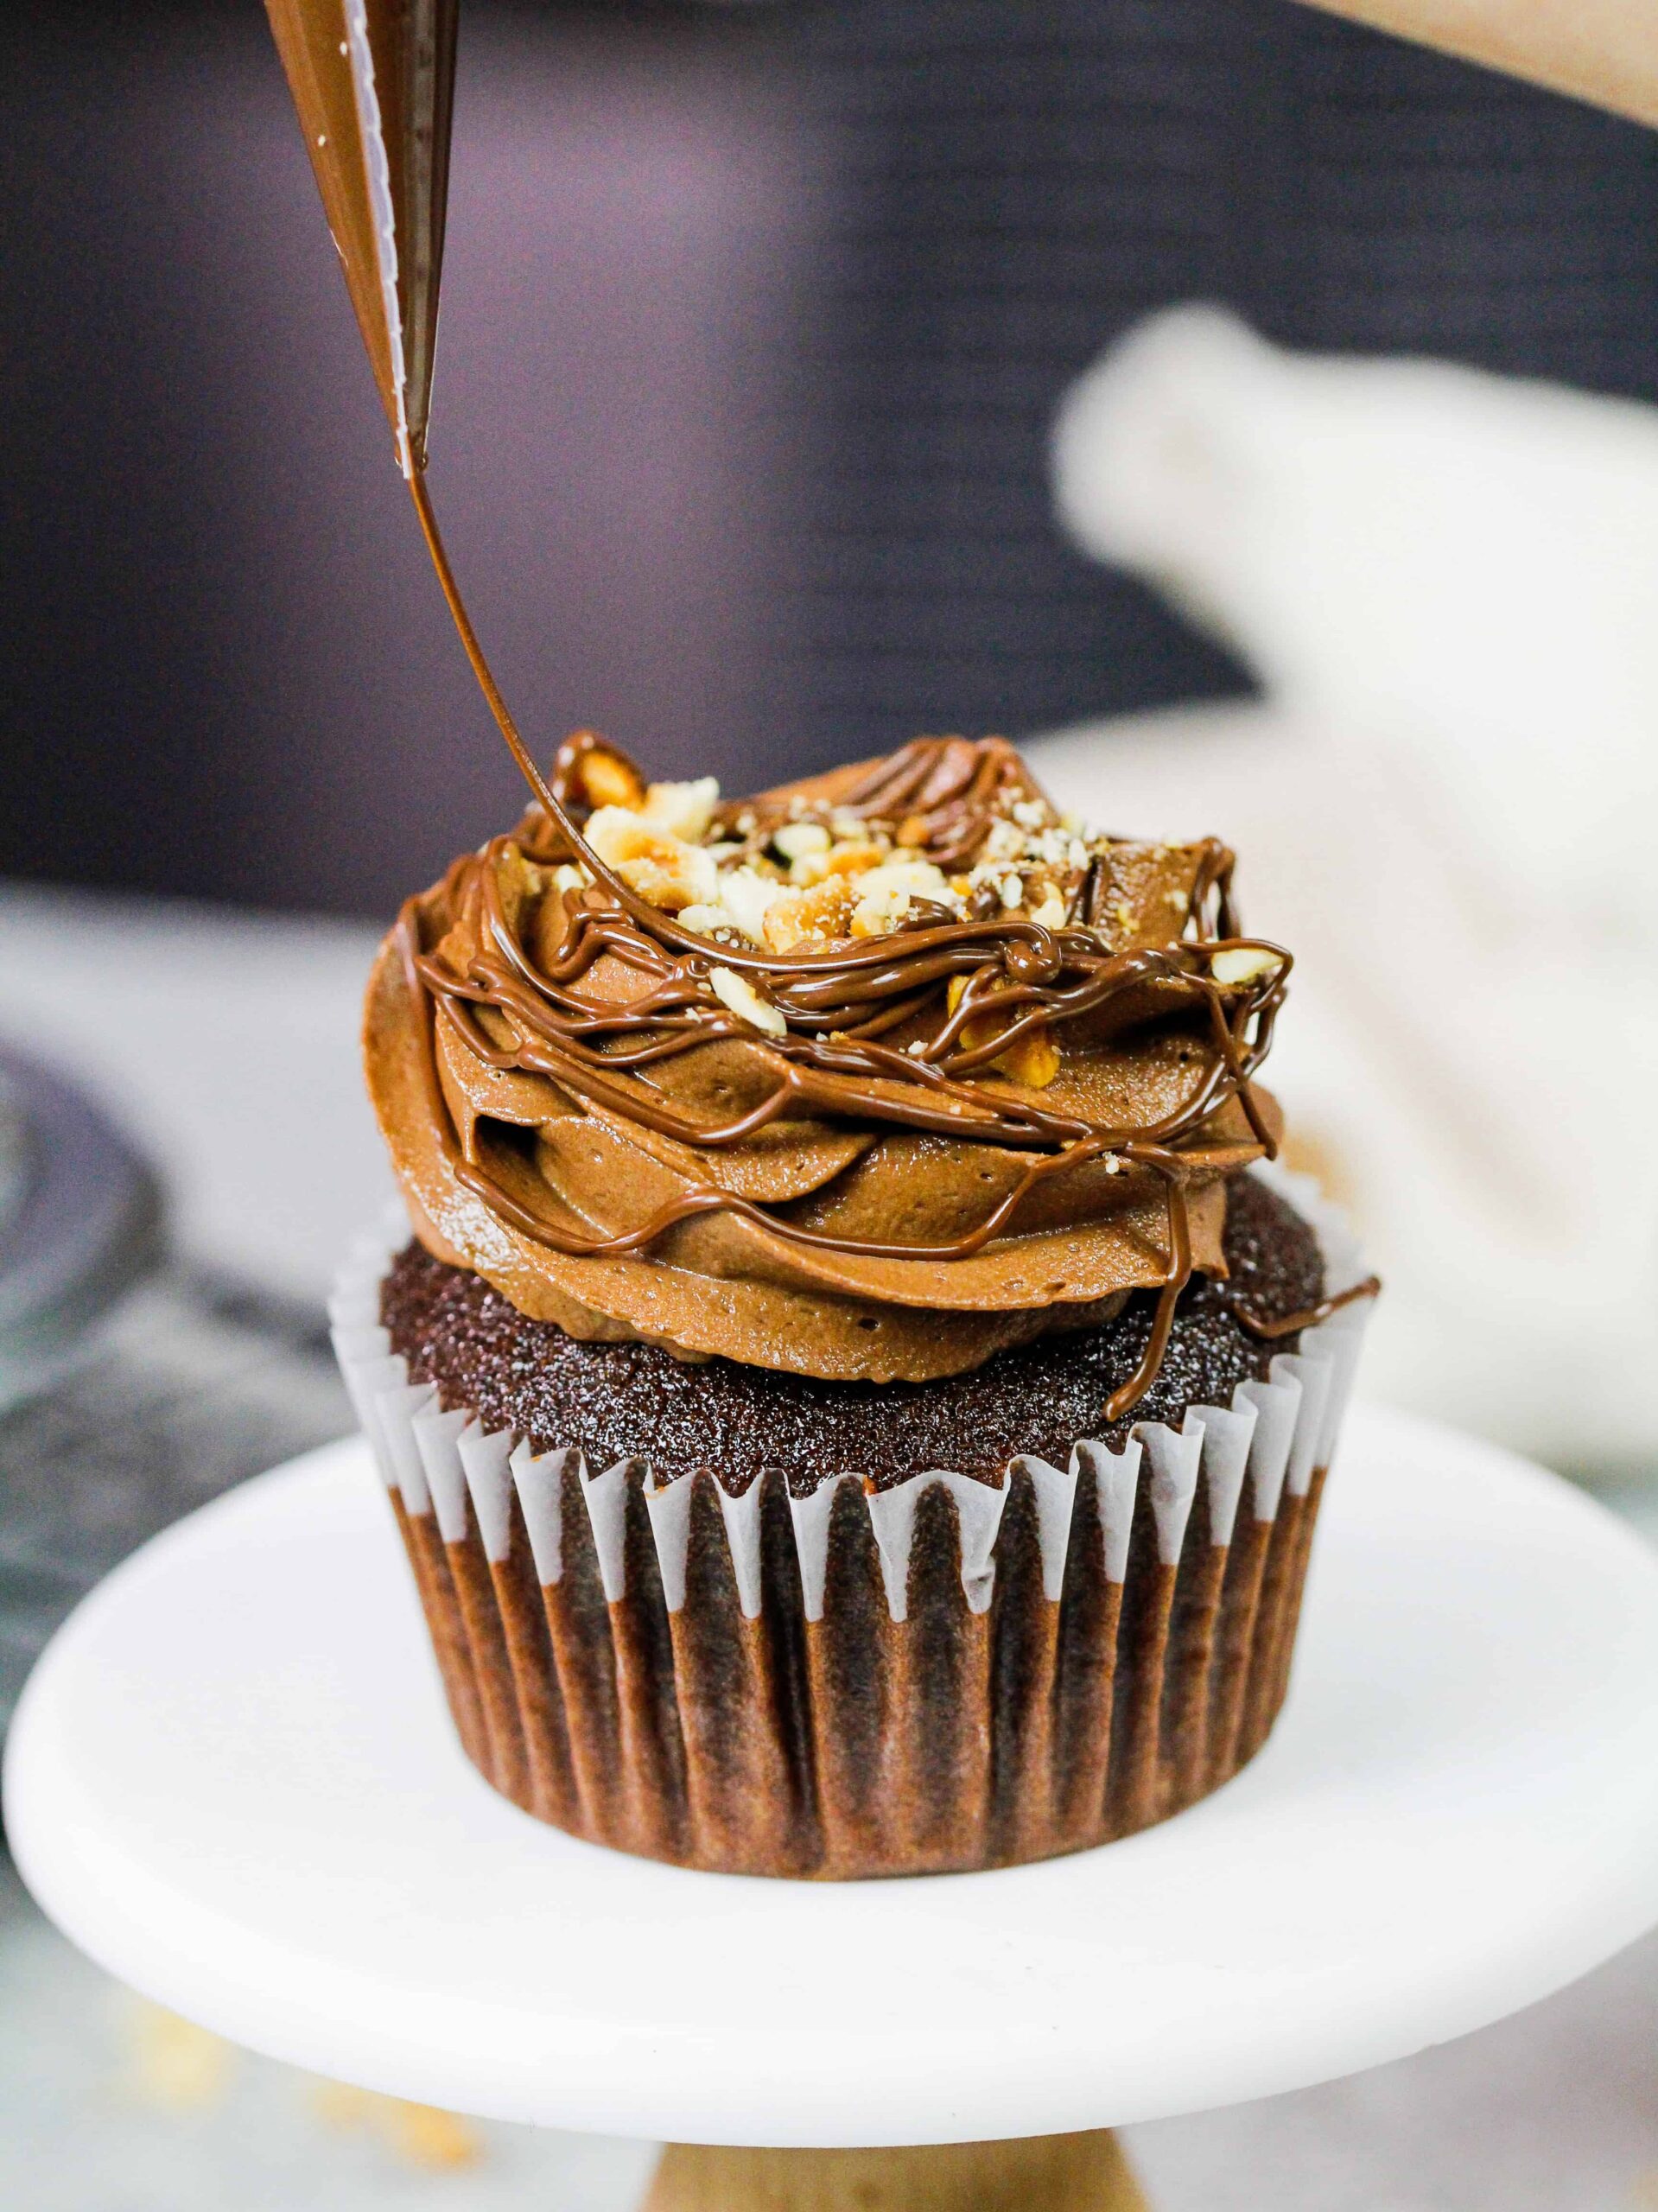 image of a Nutella cupcake being drizzled with additional Nutella to decorate it